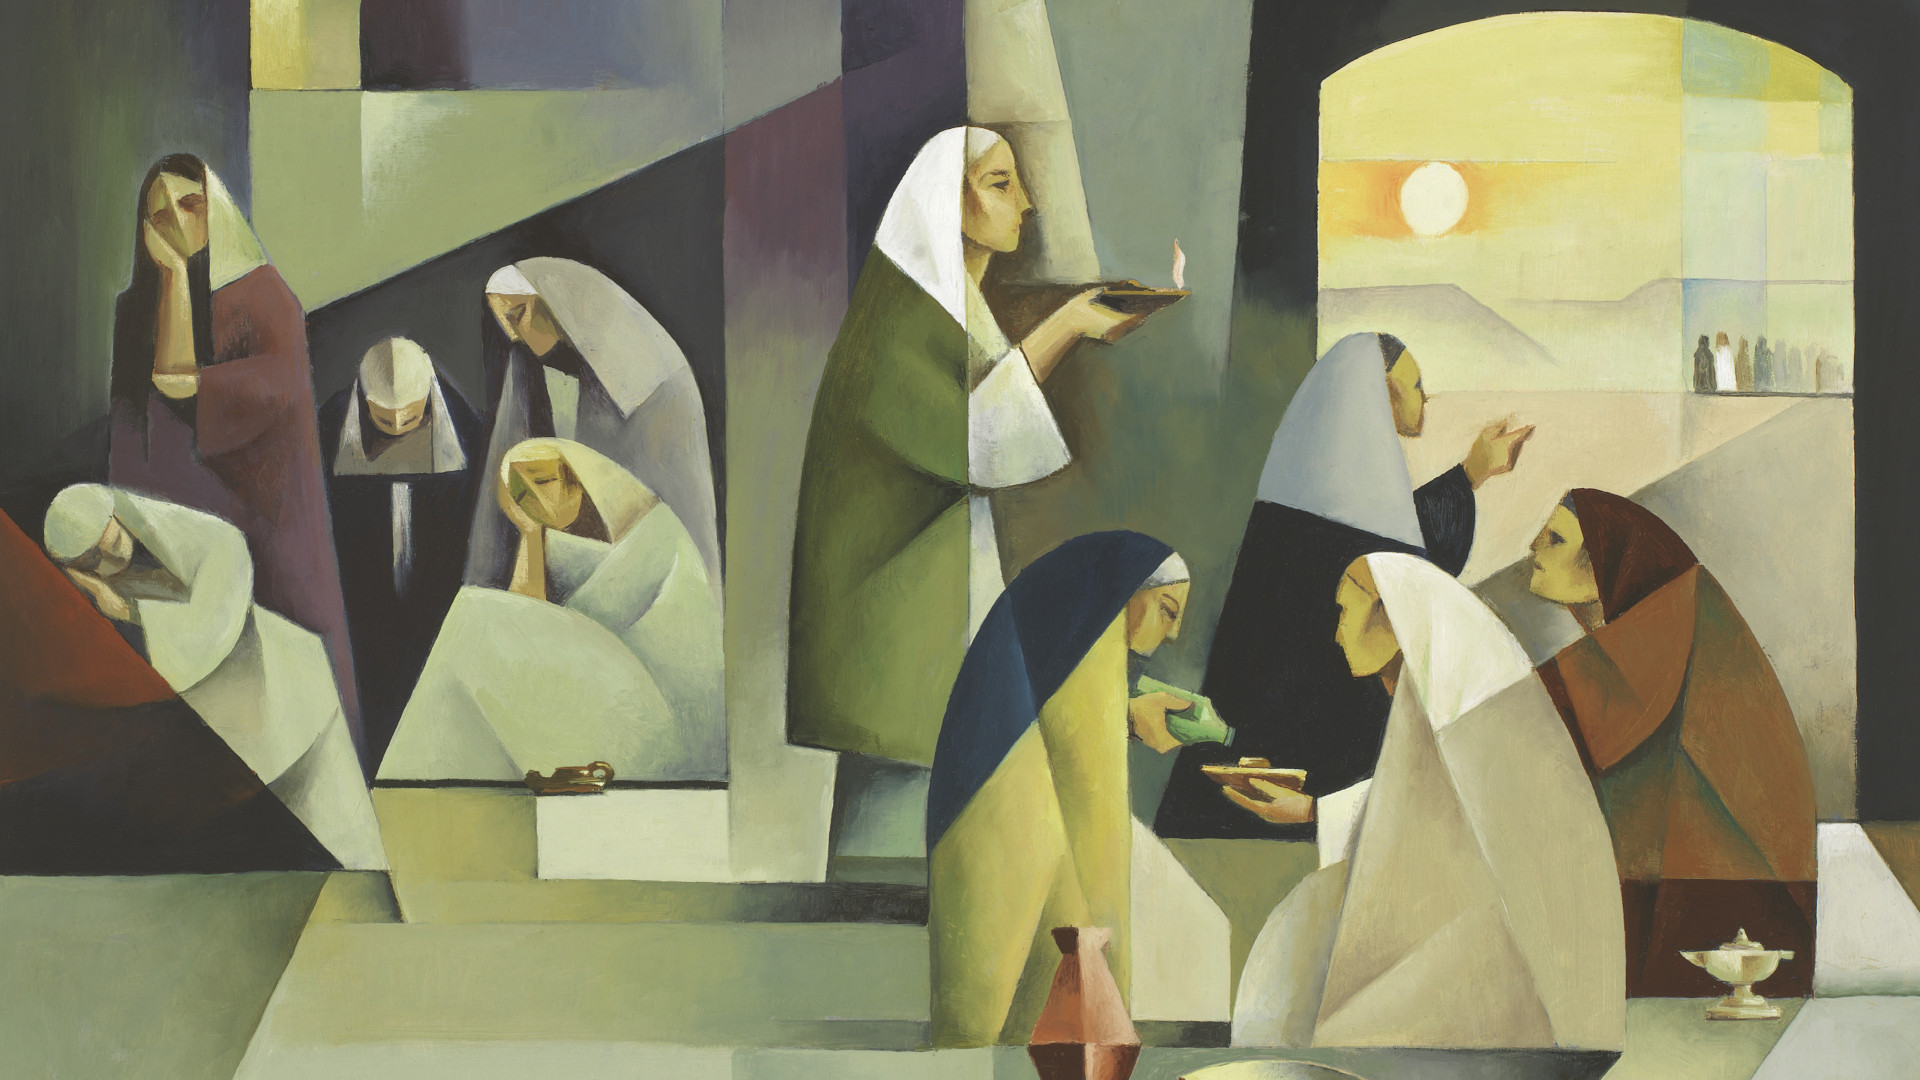 "The Ten Virgins," by Jorge Cocco, shows the wise virgins from Jesus' parable, with oil in their lamps and vessels, and the foolish virgins, who were not prepared with oil.